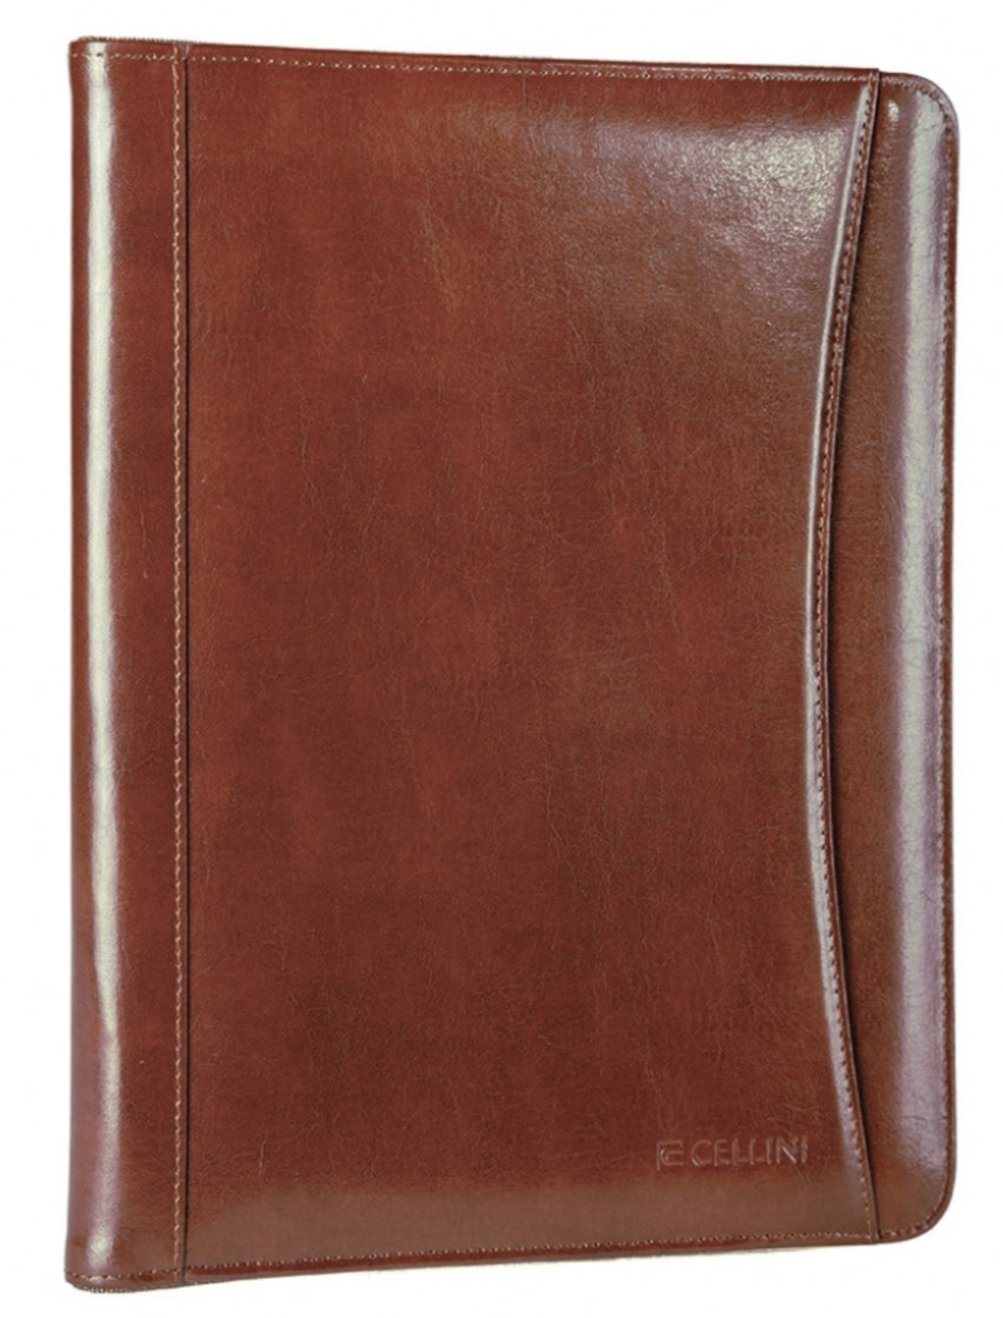 Cellini A4 Leather Zip Around Folder | Brown - iBags